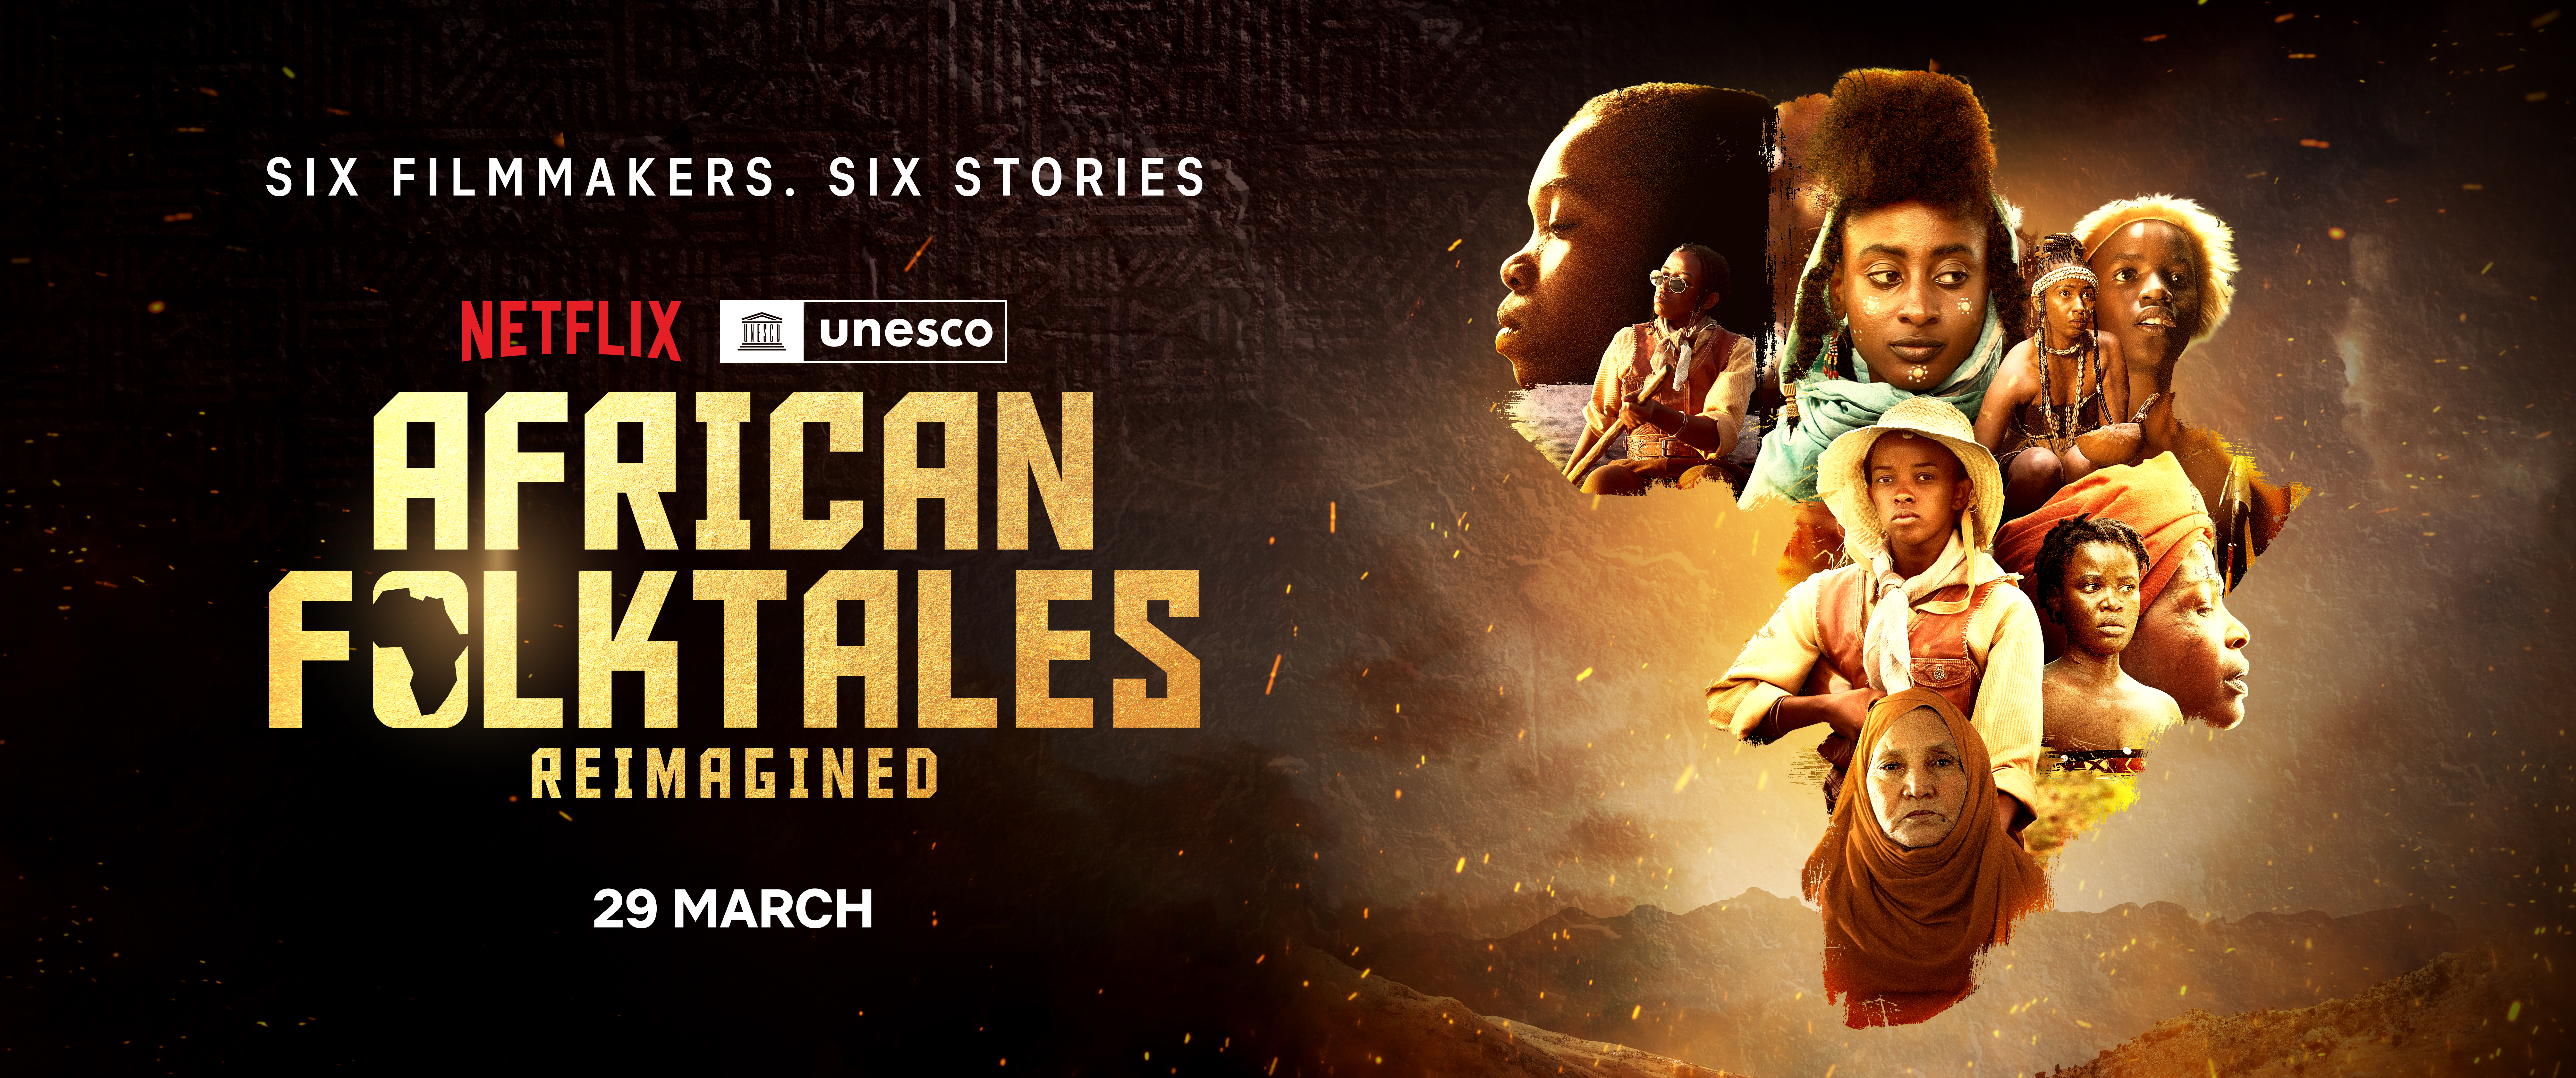 'African Folktales, Reimagined' Short Films By Netflix in Partnership With Unesco To Launch Globally On 29 March